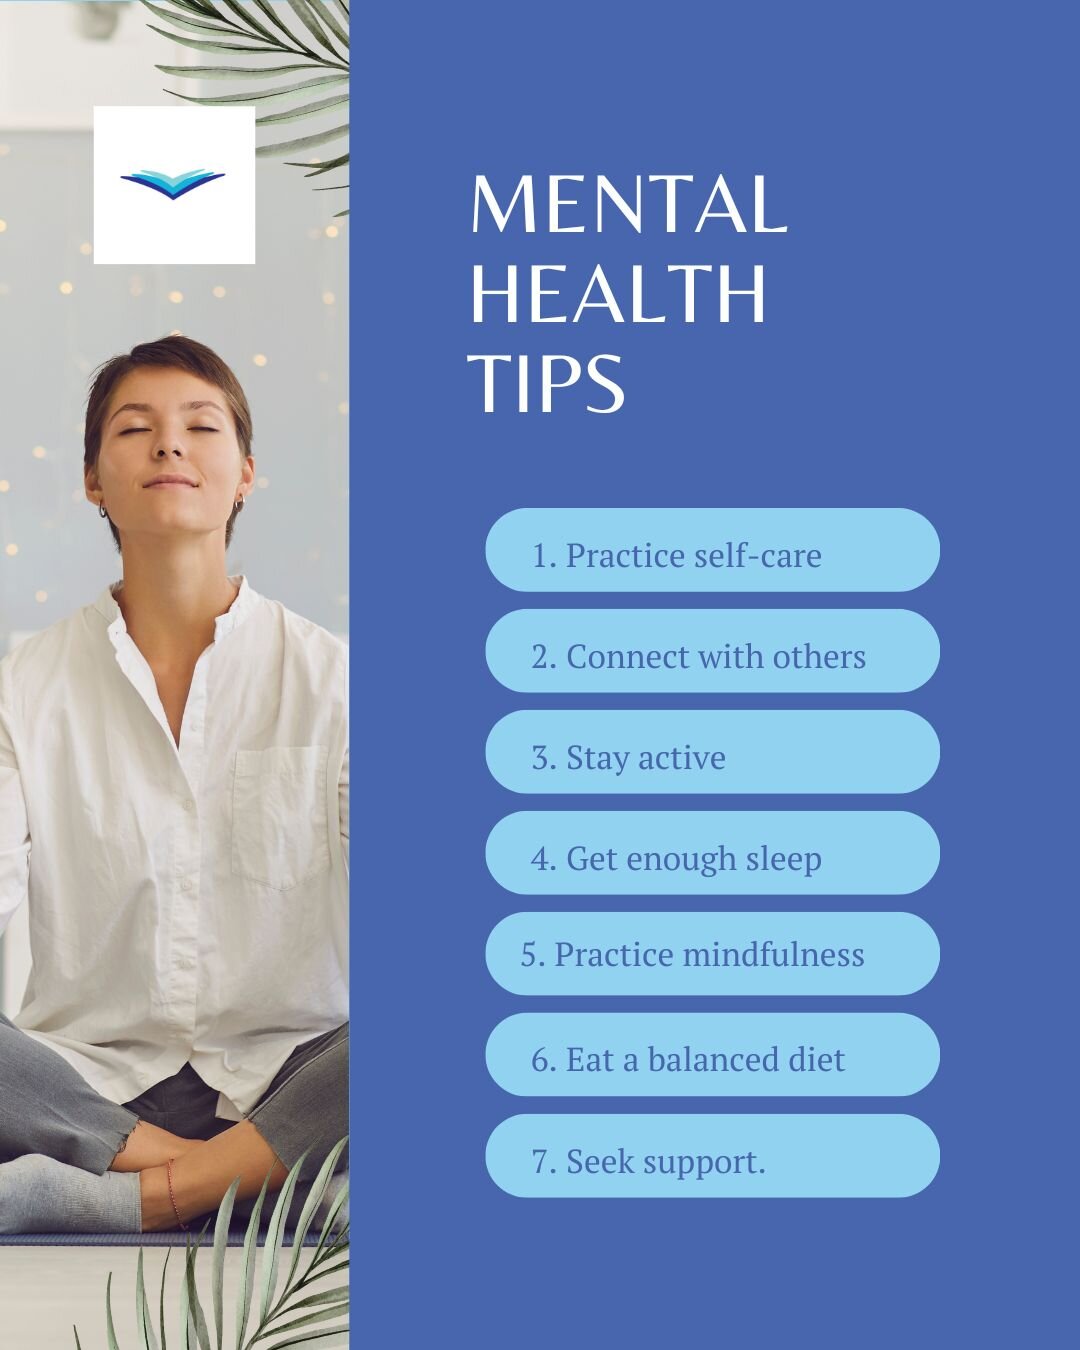 Mental Health Tips &amp; Reminders
Give yourself a checkmark if you have done any of the items below:
1. Practice Self-Care
2. Connect with others
3. Stay active
4. Get enough sleep
5. Practice mindfulness
6. Eat a balanced diet
7. Seek support

I ma